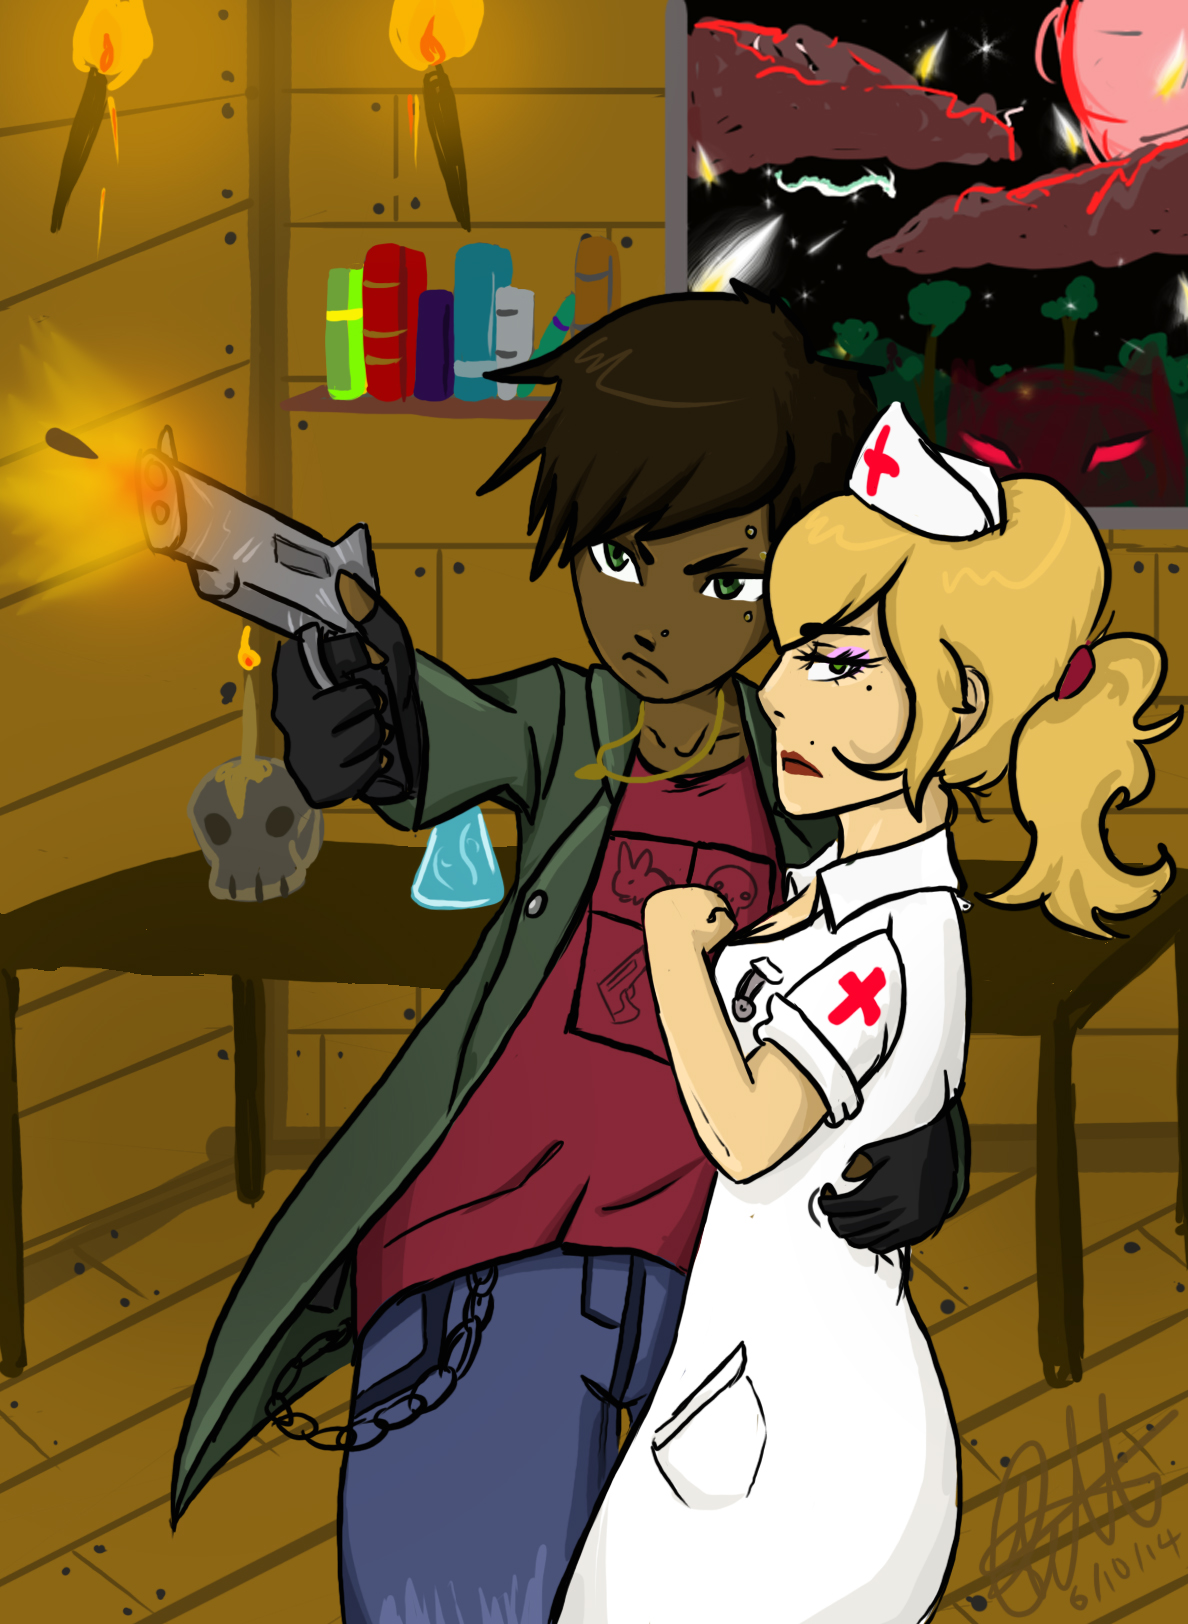 Steam Community Arms Dealer And The Nurse 